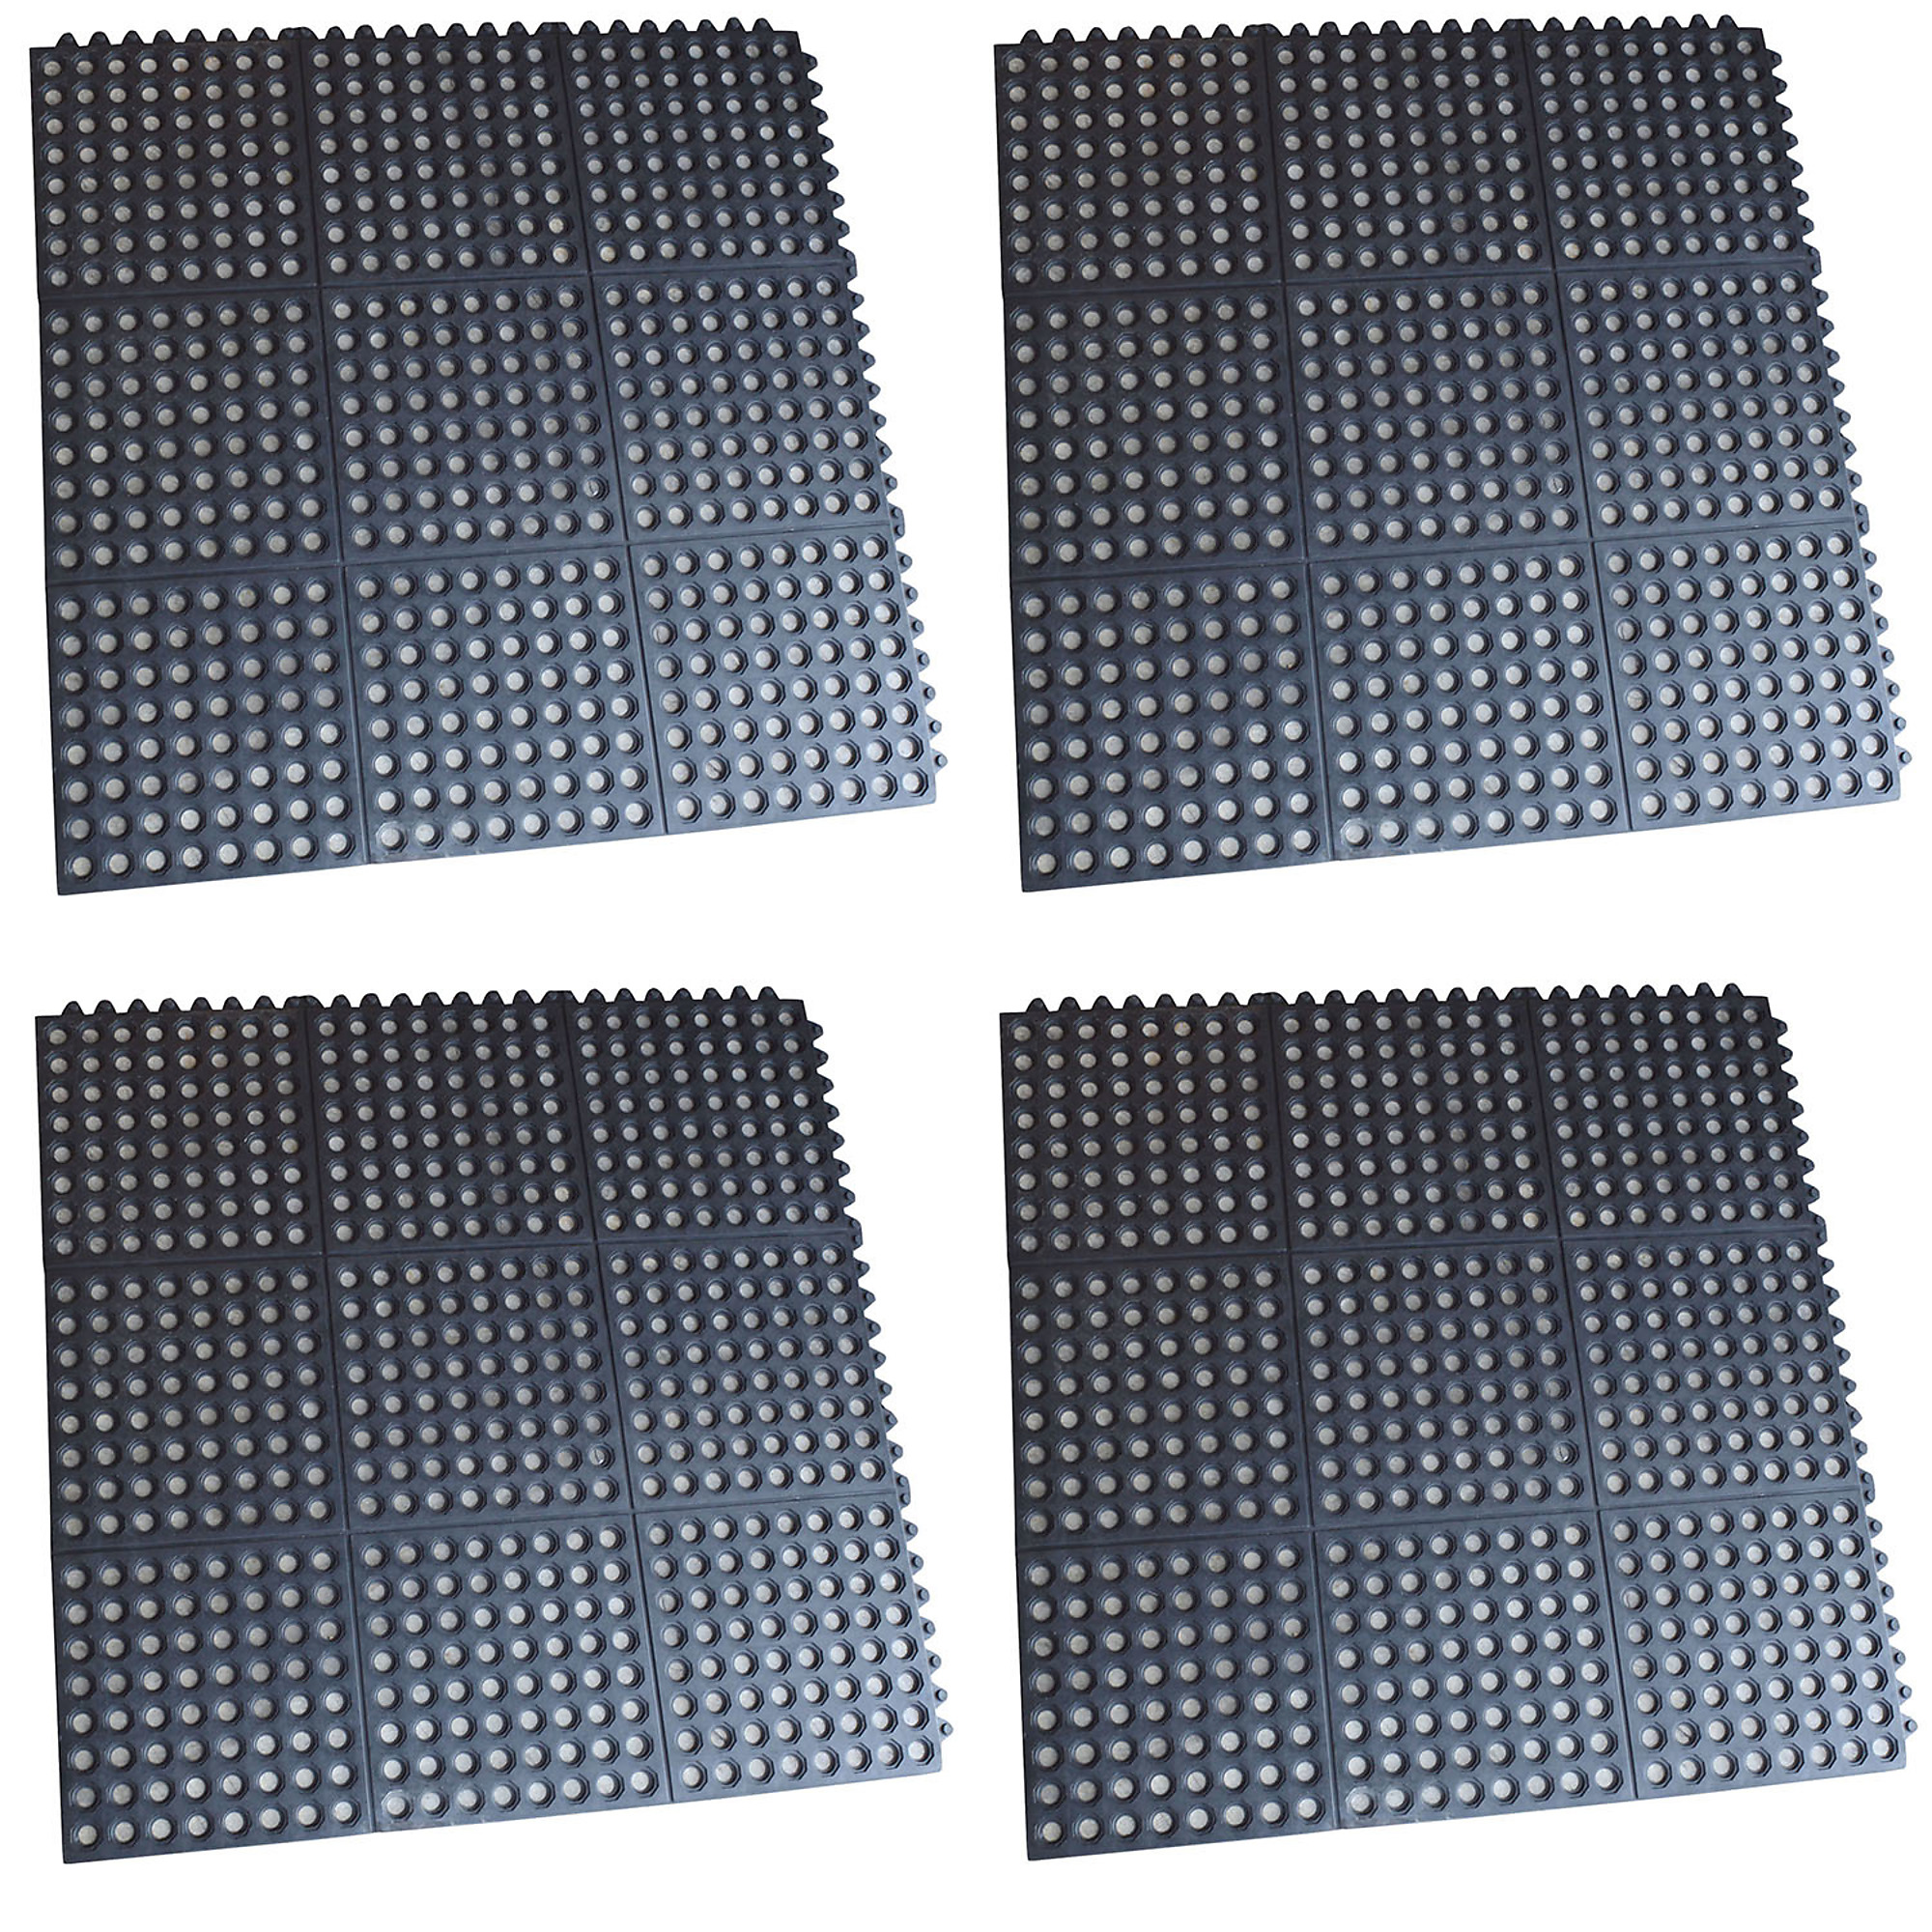 Buffalo Tools, 3 x 3ft. Interlocking Rubber Mats - 4 Pack, Width 36 in, Length 36 in, Thickness 3/8 in, Model RMAT33I4PK